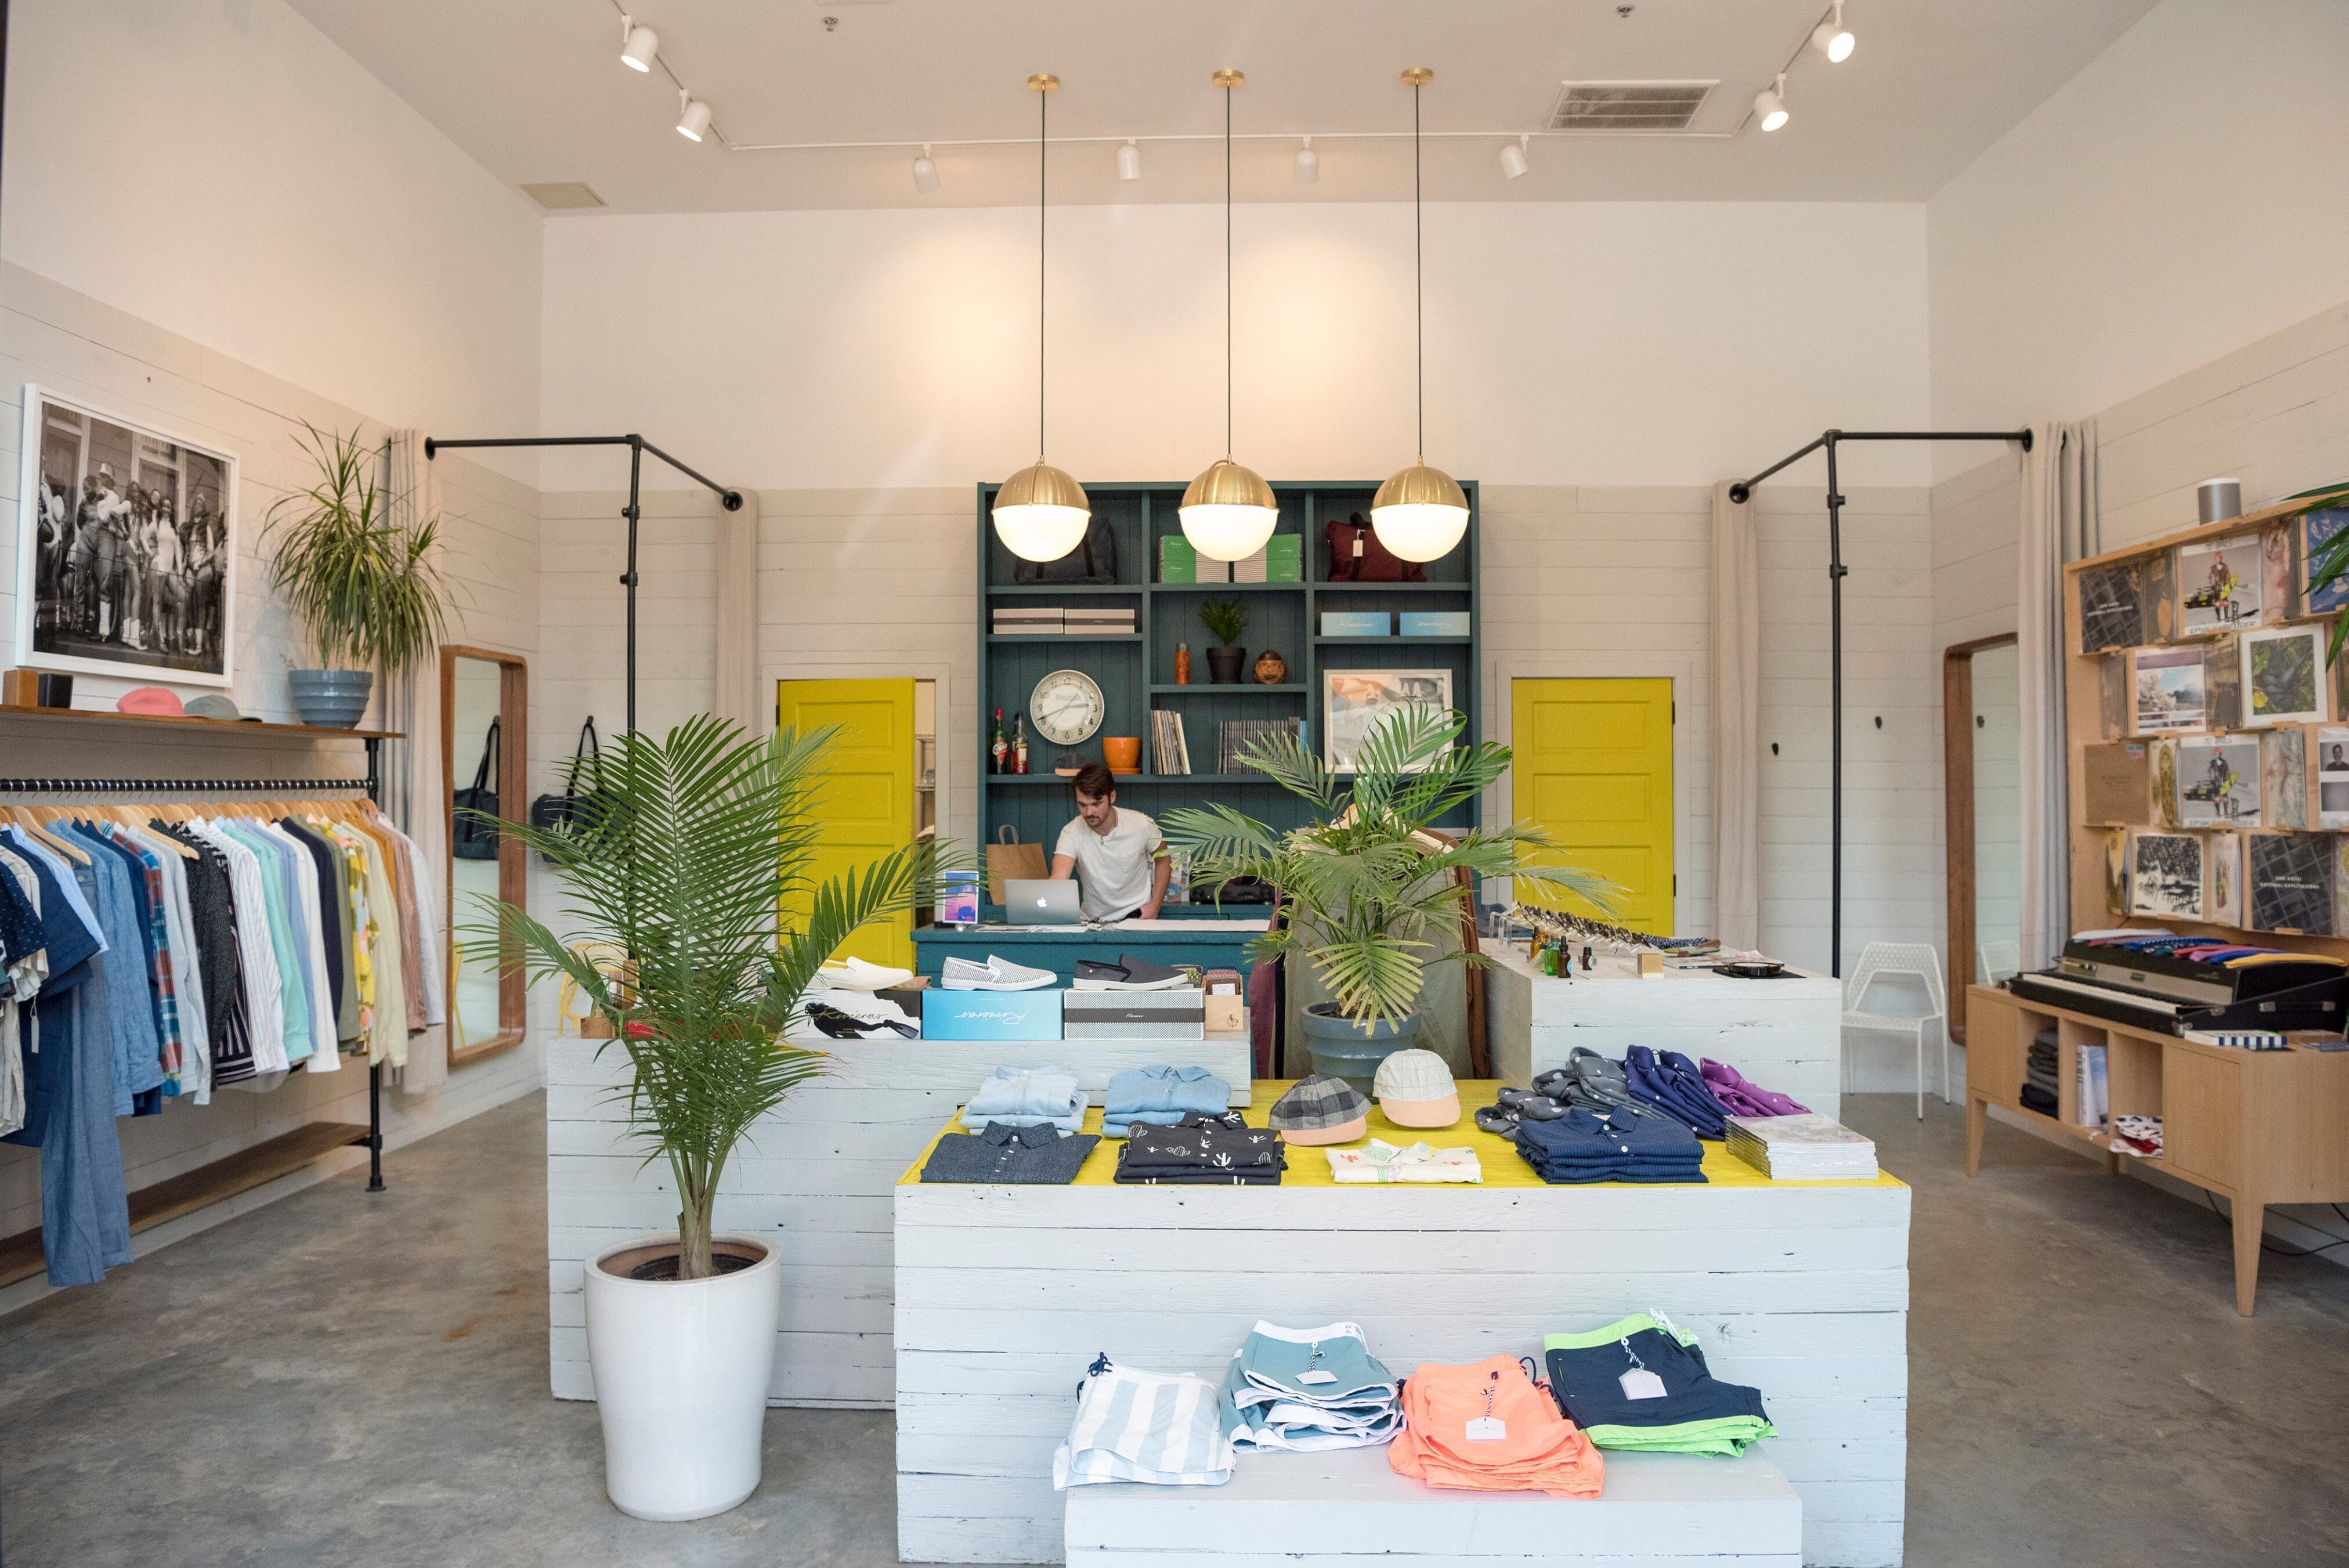 Retail store in New Orleans, Soma featuring clothing displayed neatly folded and hung on a rack.